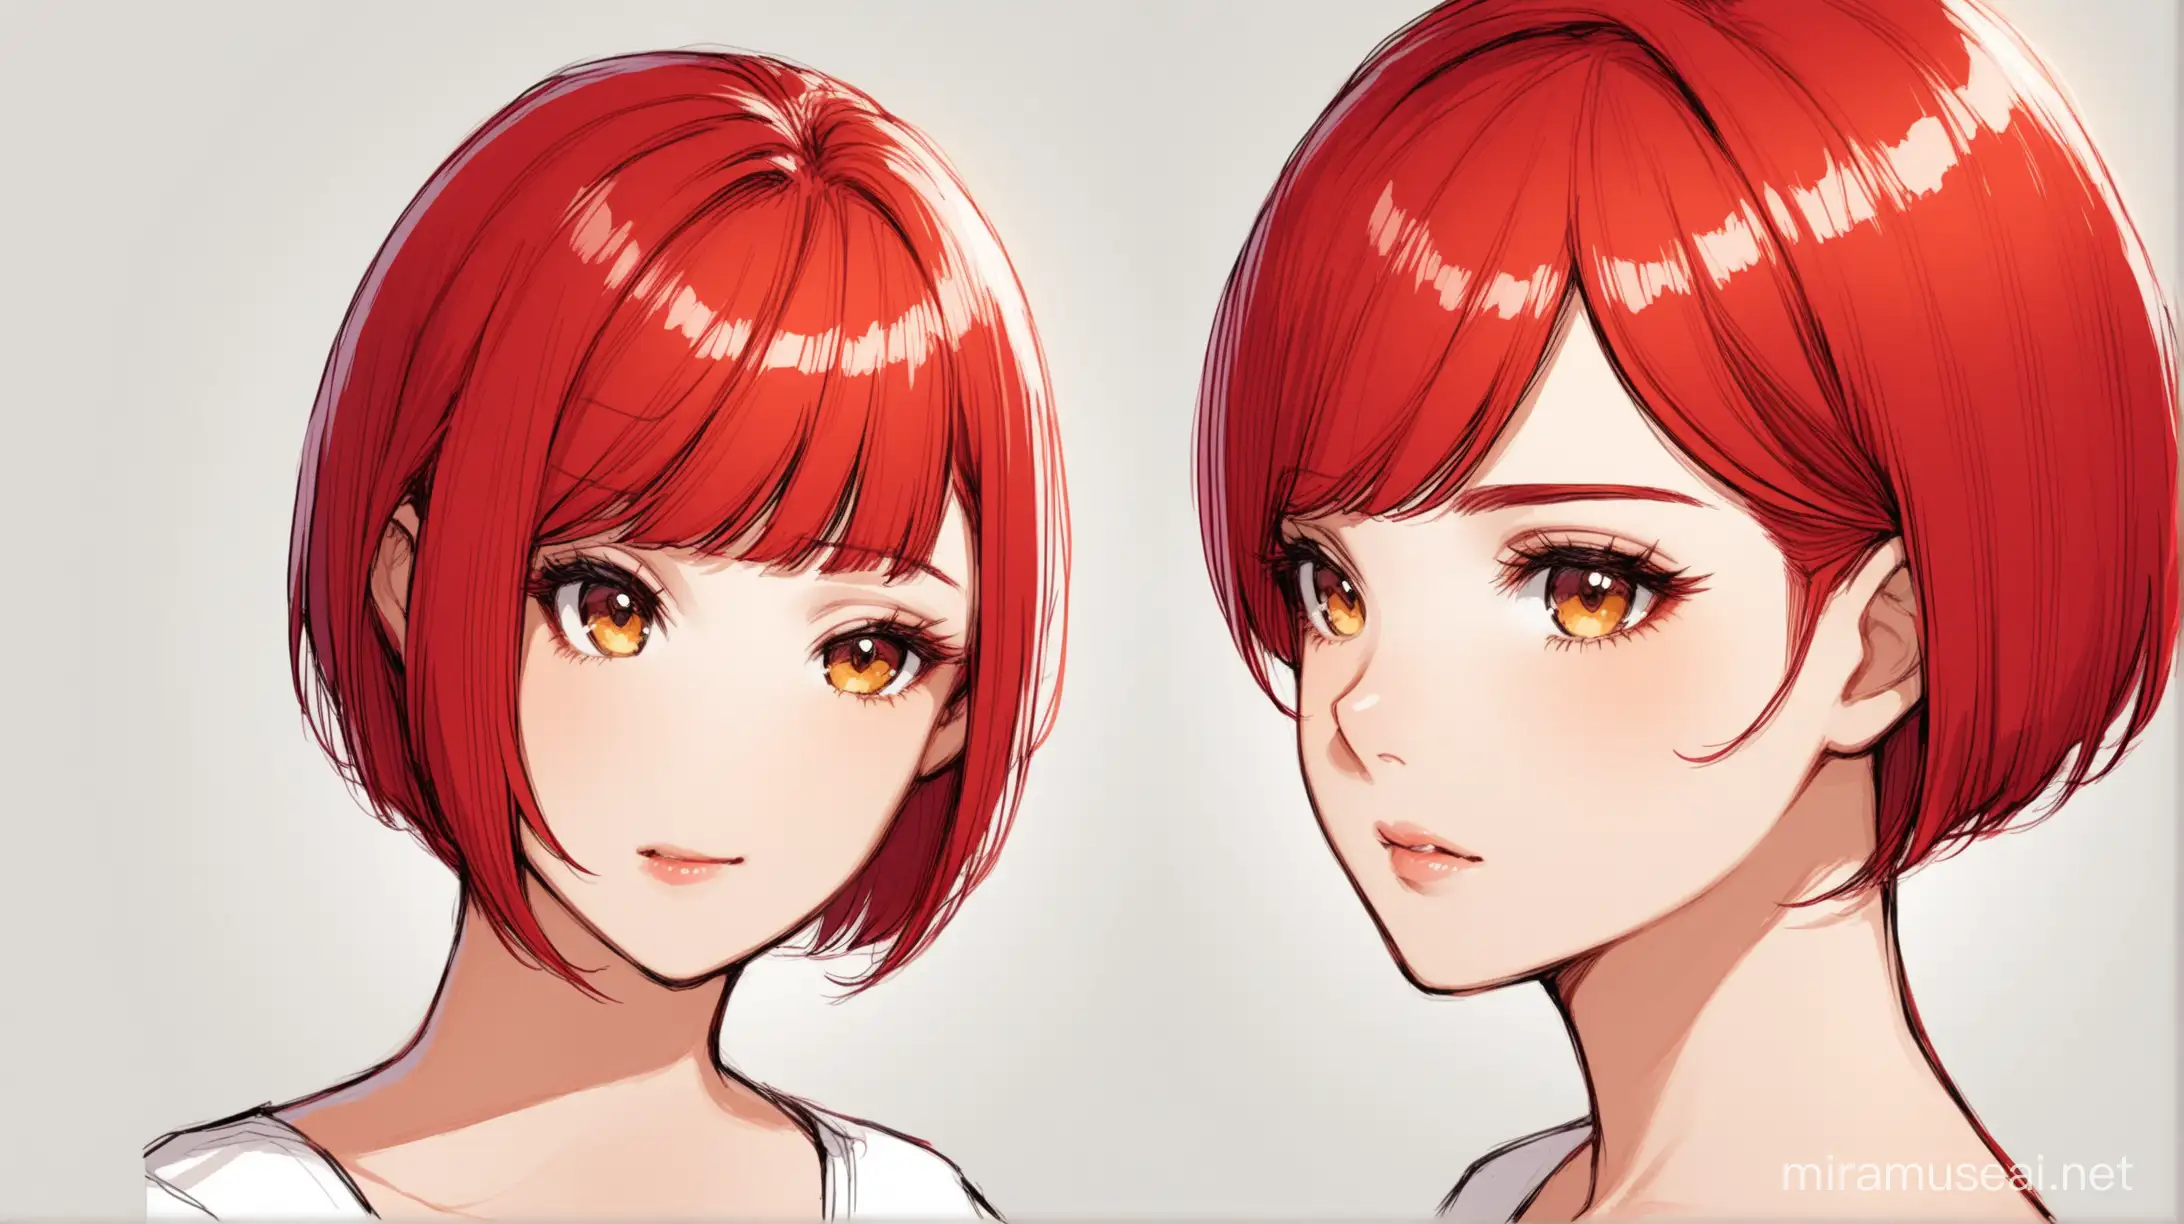 Draw a woman with short red hair cut 